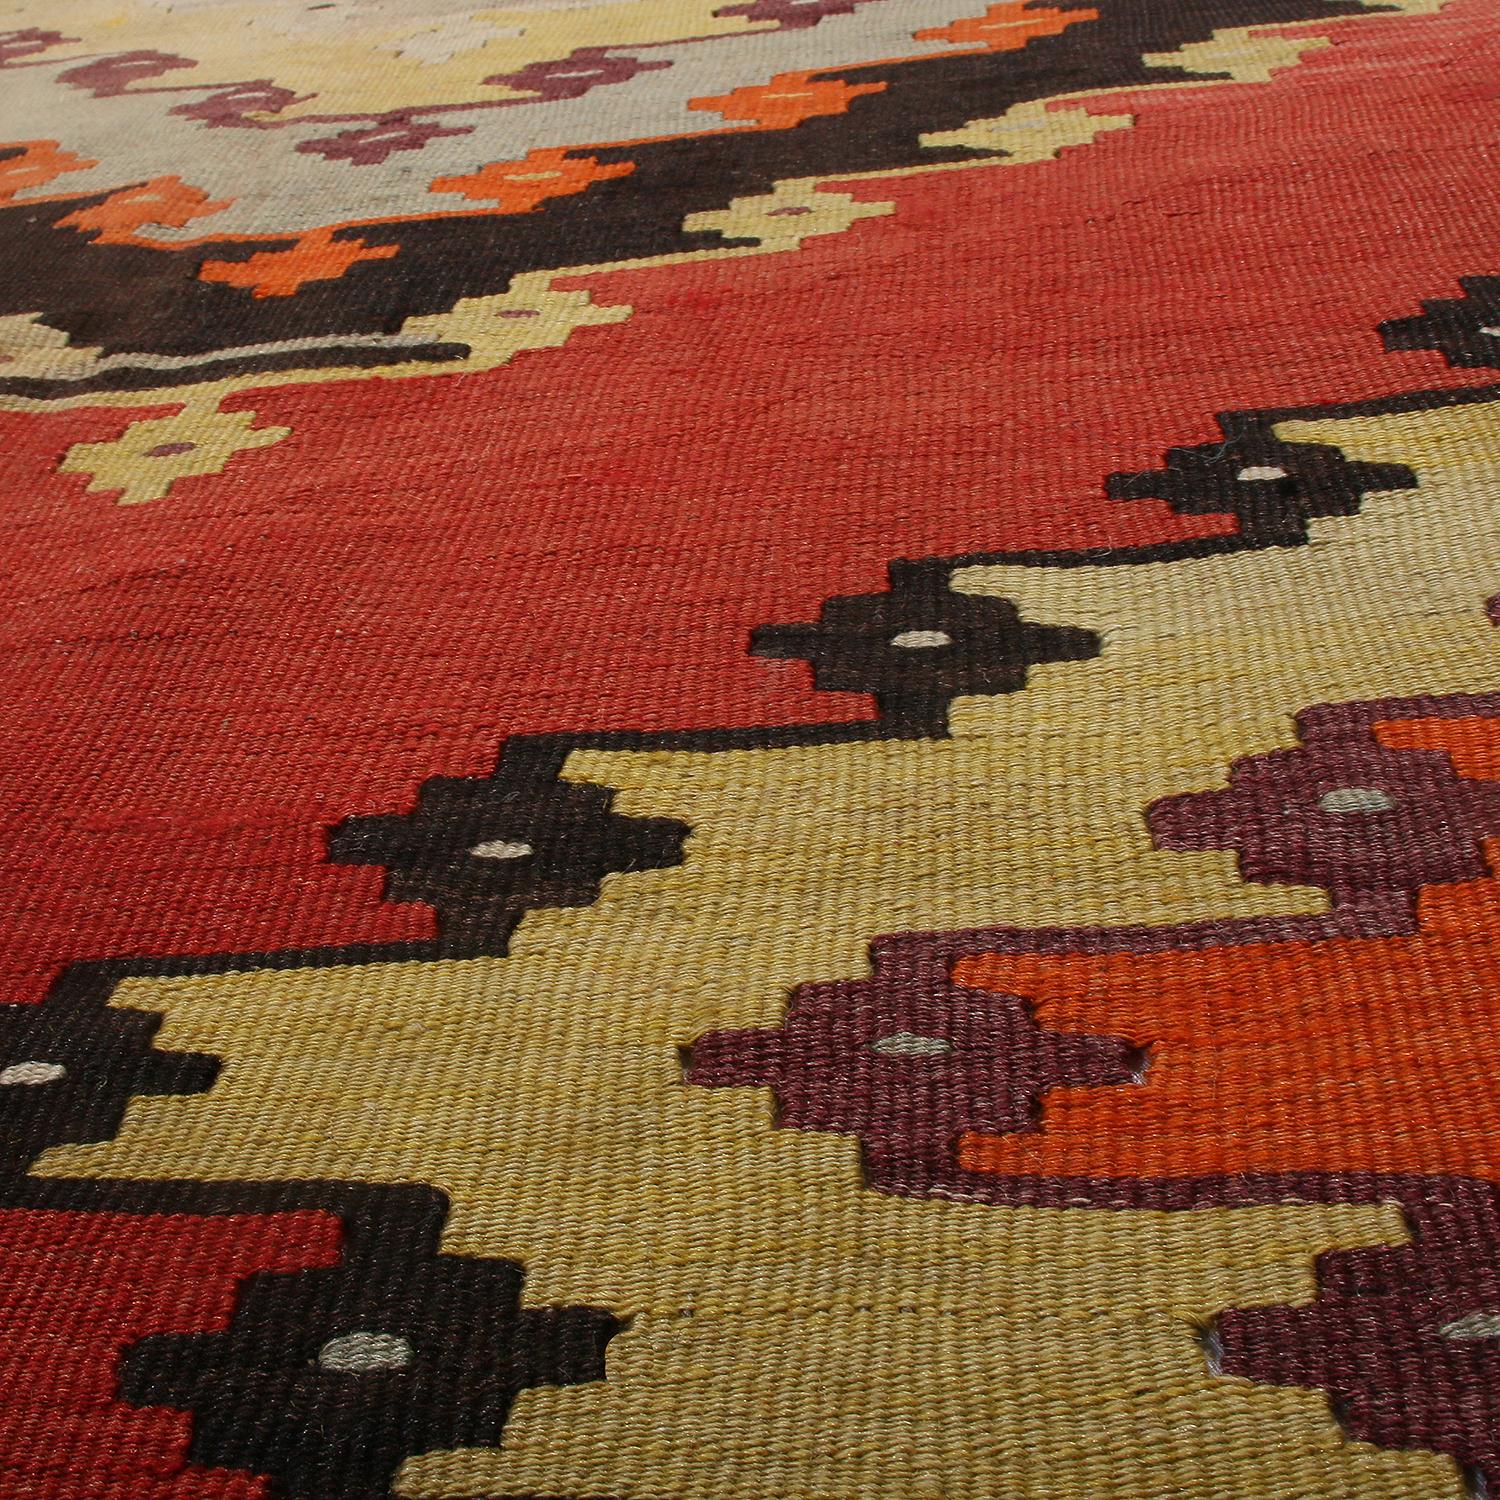 Vintage Midcentury Sarkoy Red Wool Kilim Rug with Diamond Pattern In Good Condition For Sale In Long Island City, NY